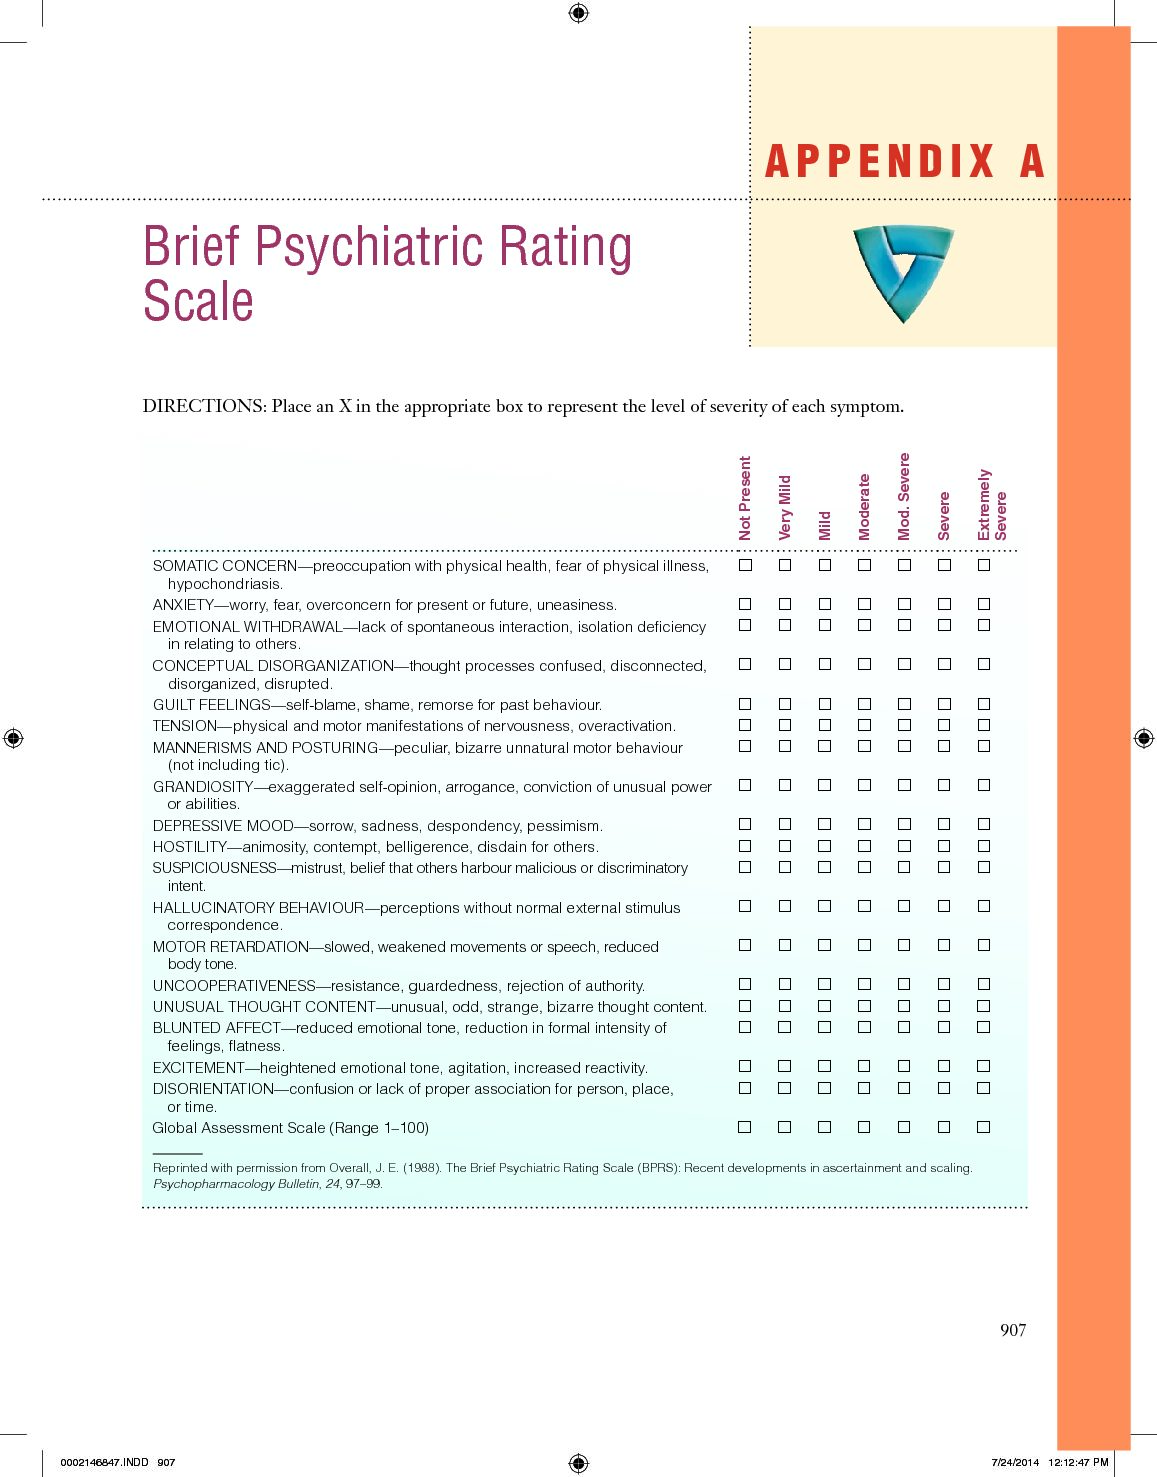 Brief Psychiatric Rating Scale By Psychopharmacology Bulletin